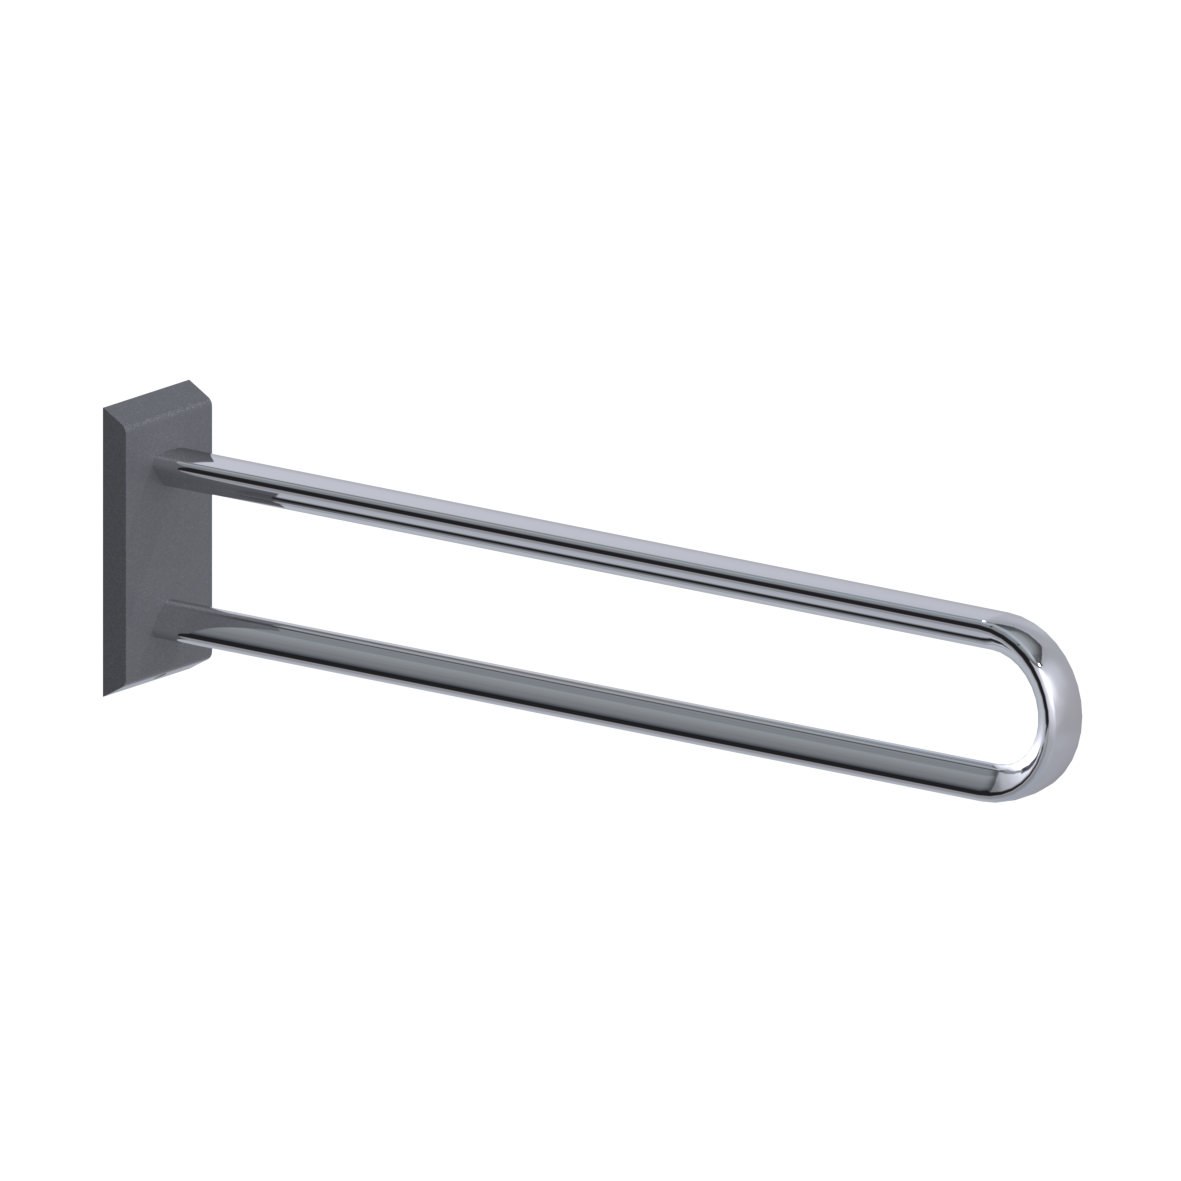 Cavere Care Chrome Wall support rail vario, with base plate, left and right, L = 850 mm, Chrome metallic anthracite